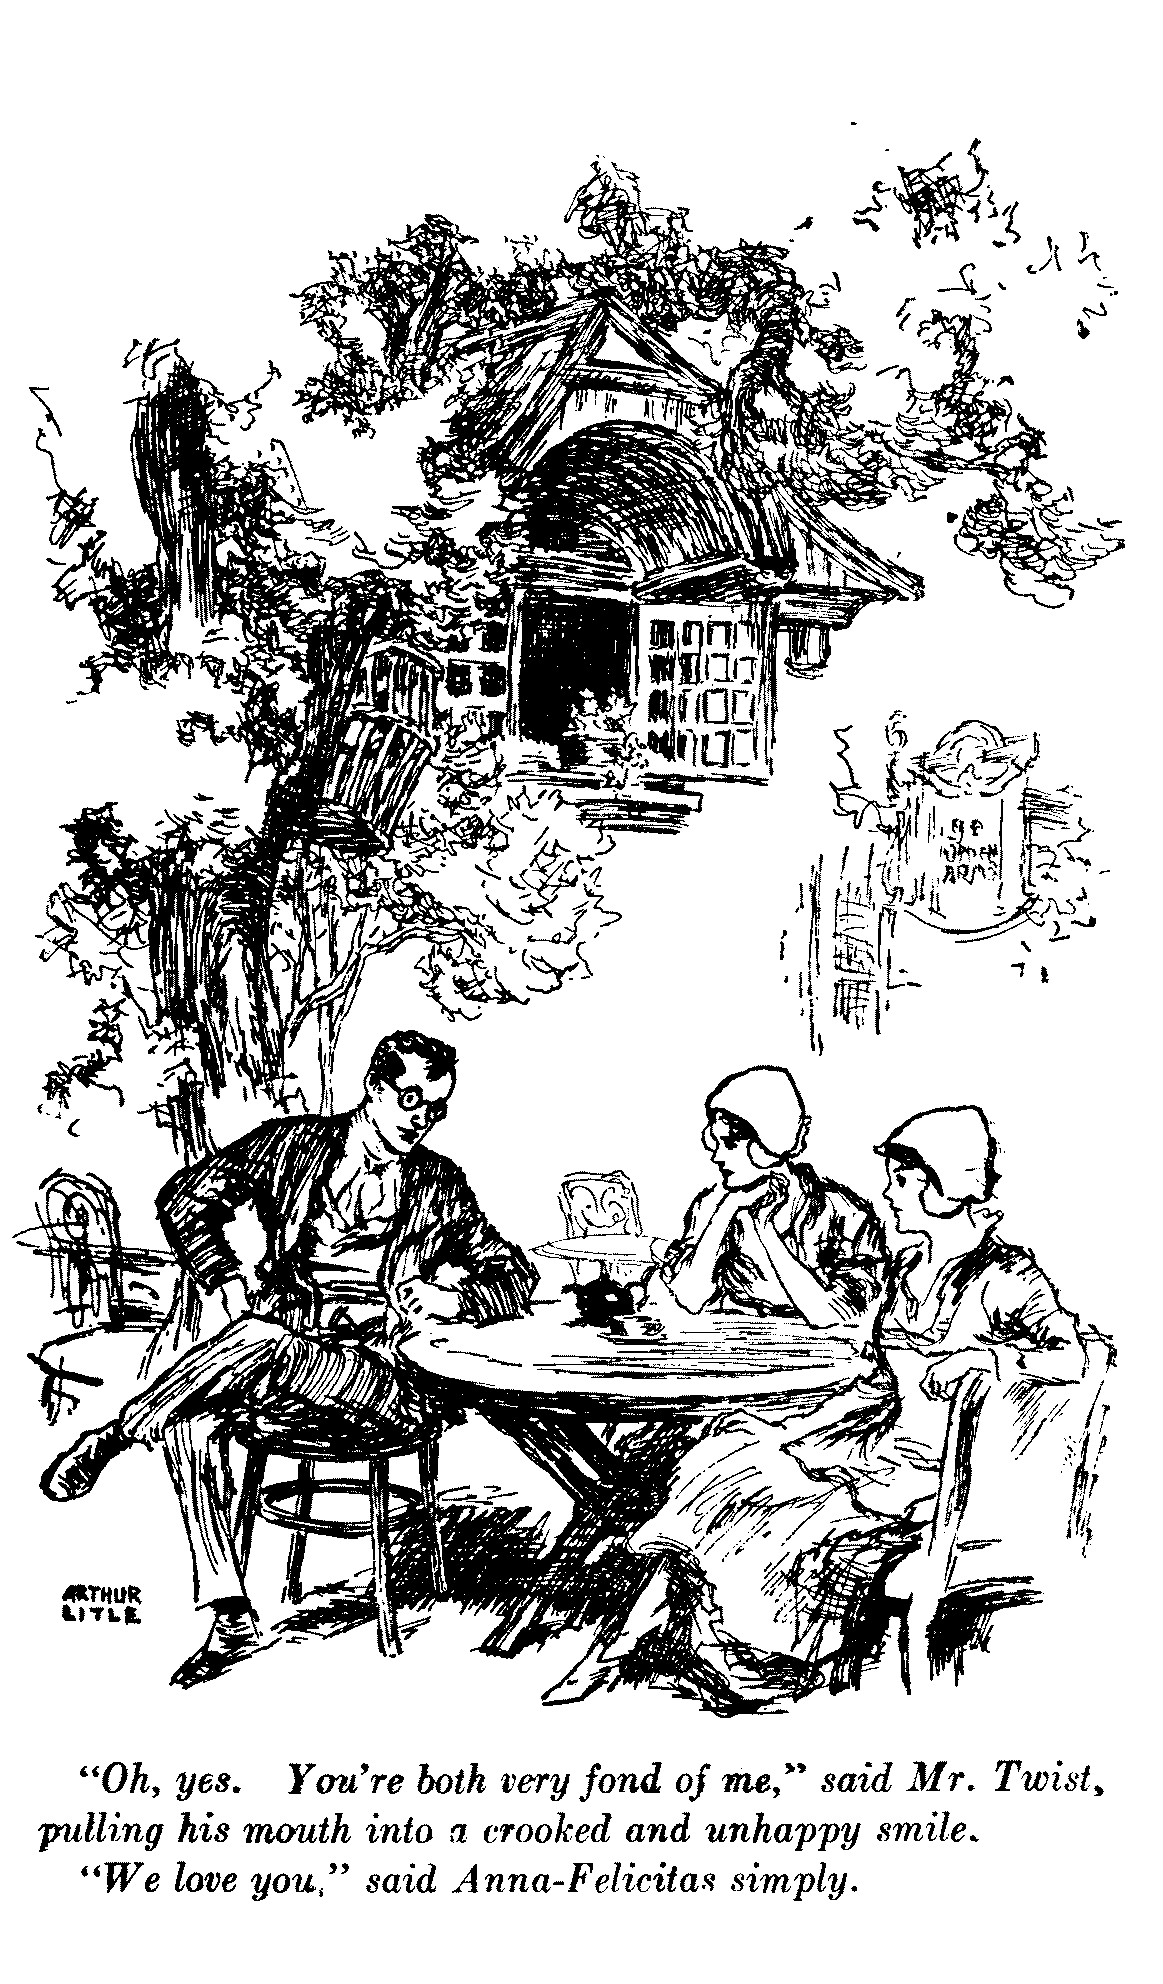 Picture of man and two girls having tea in front of an inn. Signed Arthur Litle. Caption: "Oh, yes. You're both very fond of me," said Mr. Twist, pulling his mouth into a crooked and unhappy smile."We love you." said Anna-Felicitas simply.